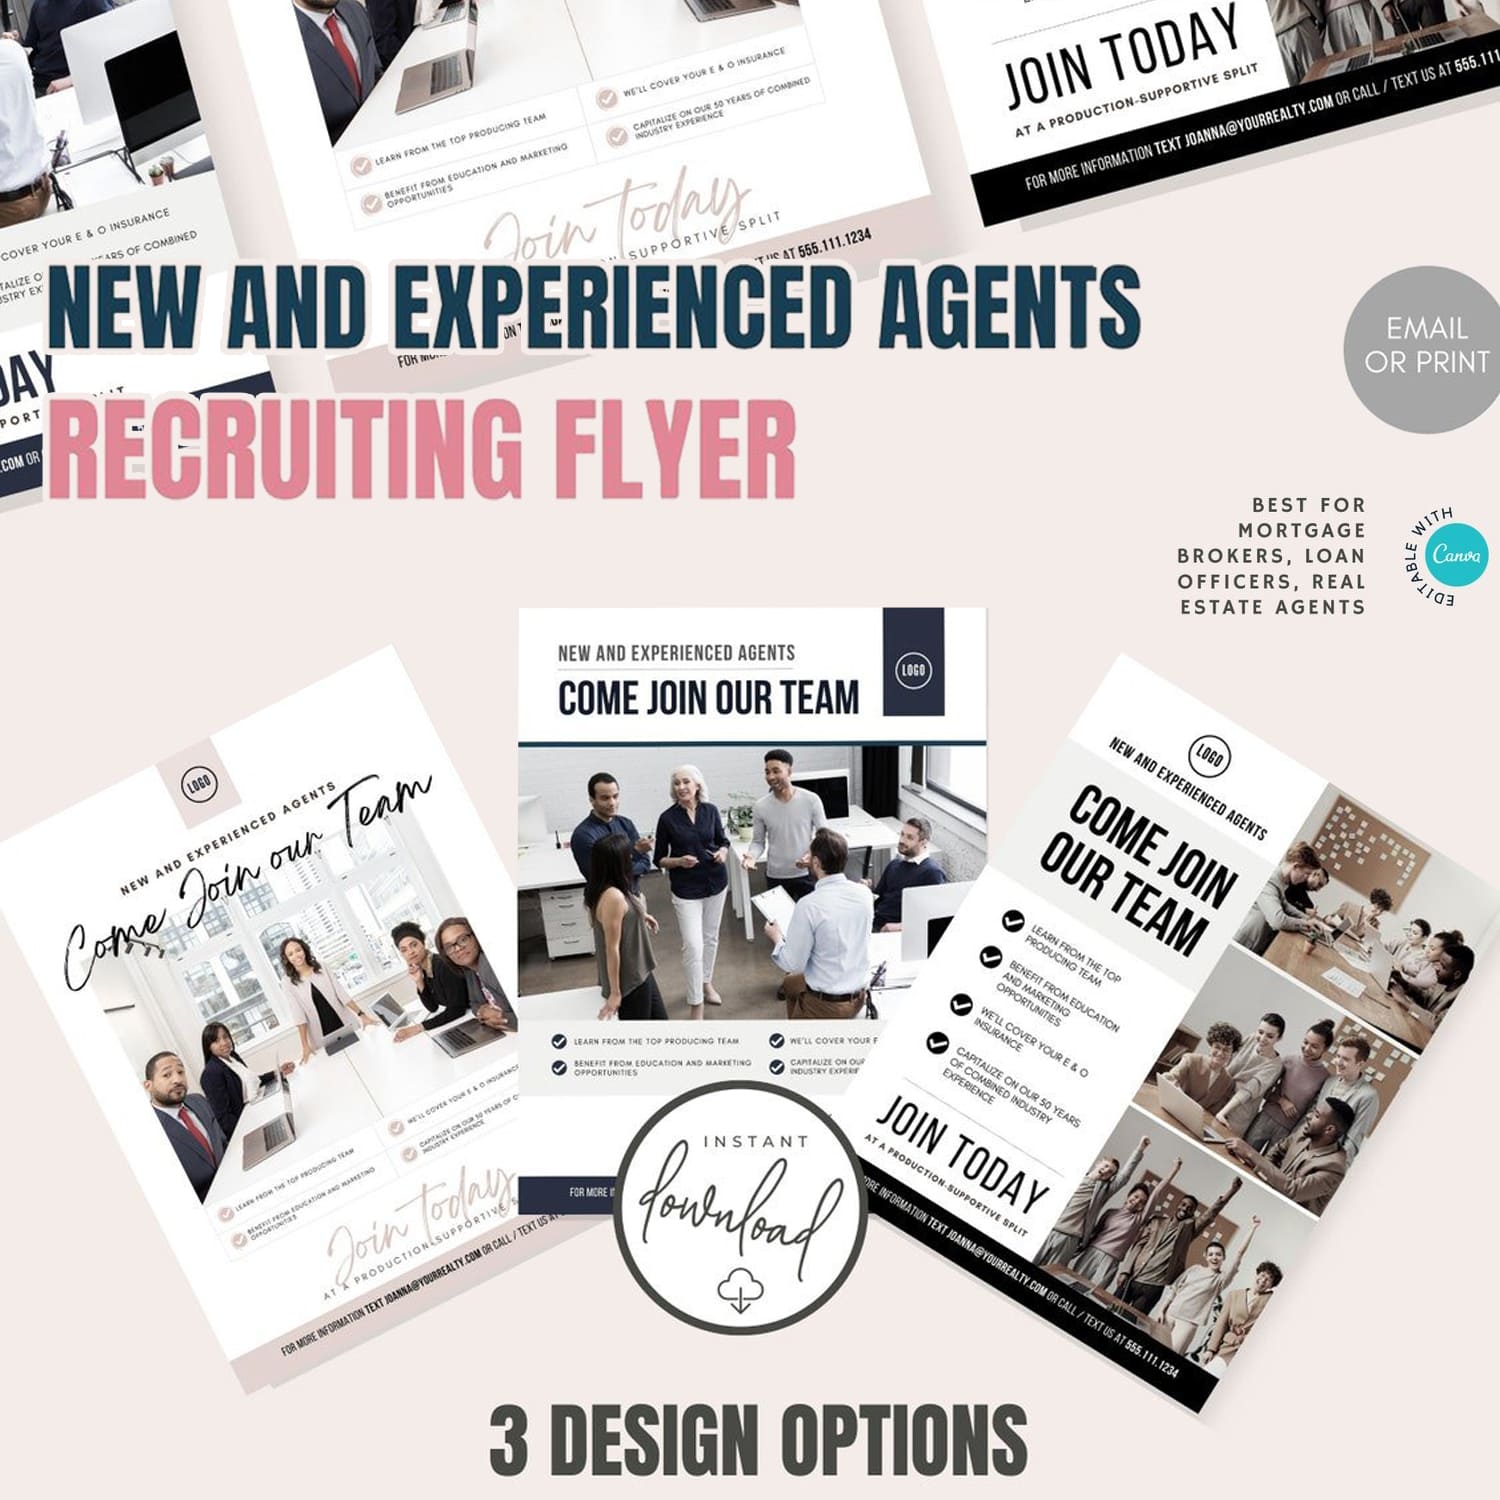 Real Estate Recruiting Flyer - CANVA cover.